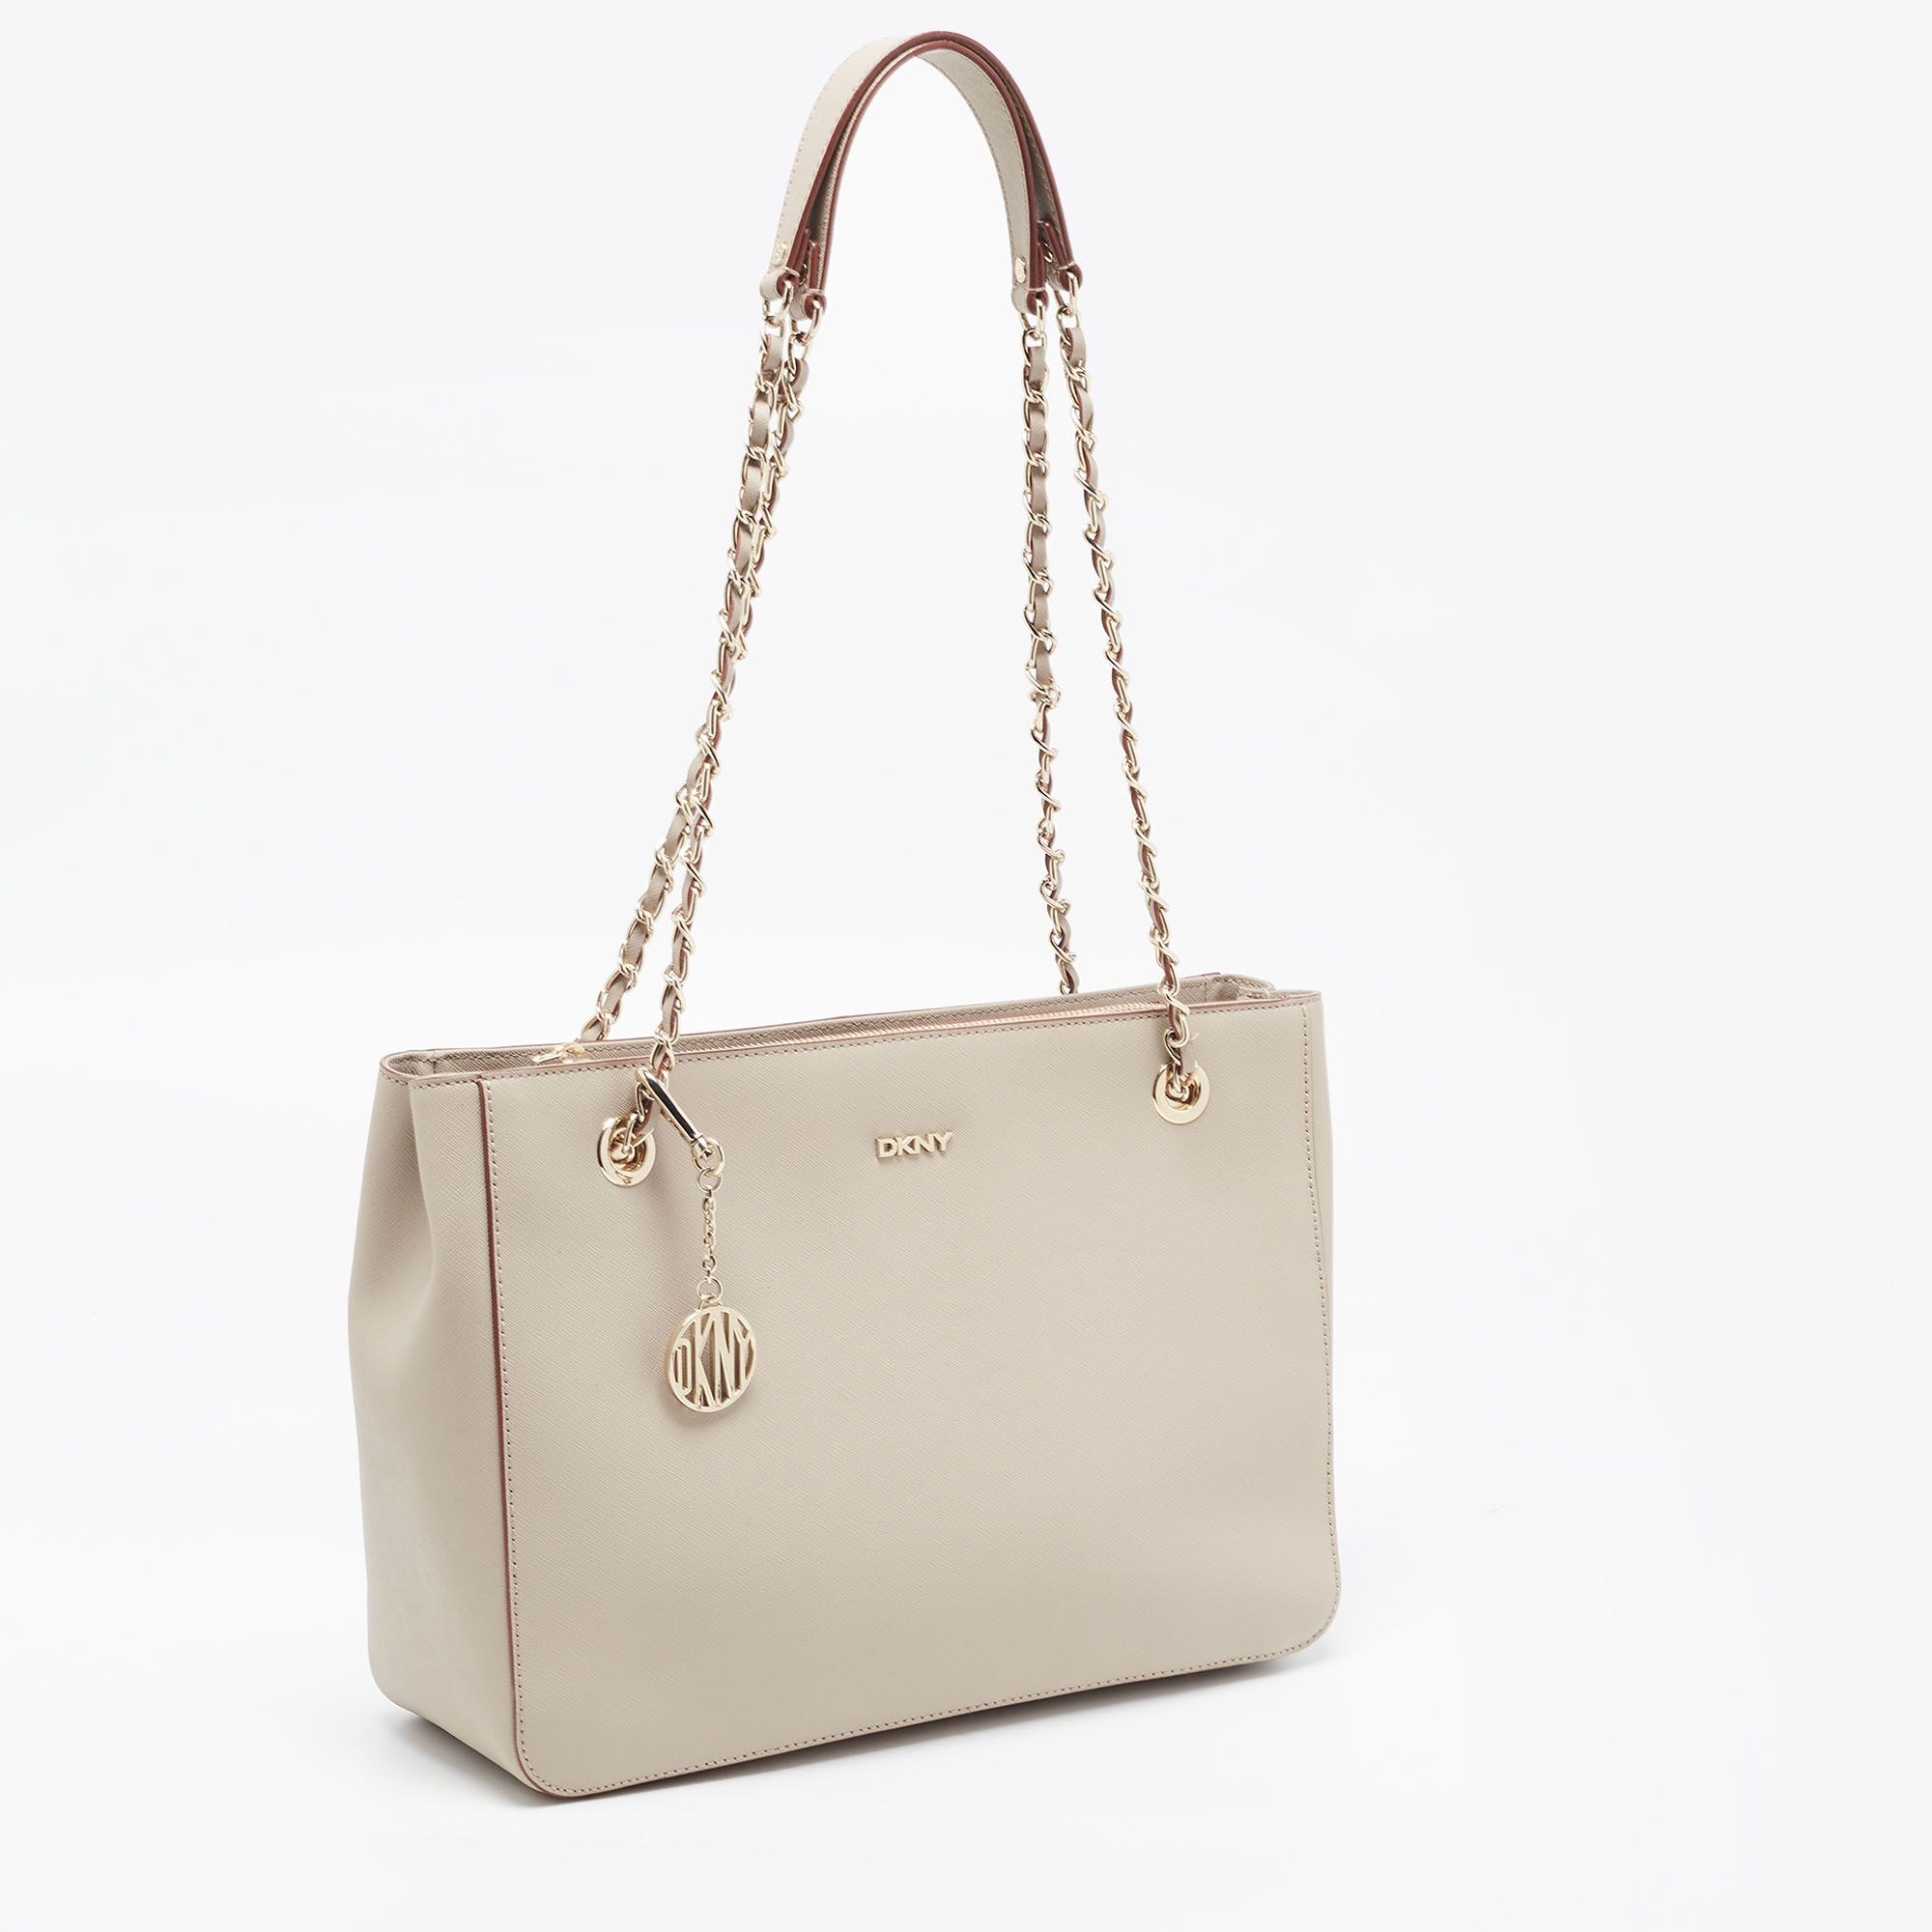 Dkny Light Beige Saffiano Leather Chain Tote